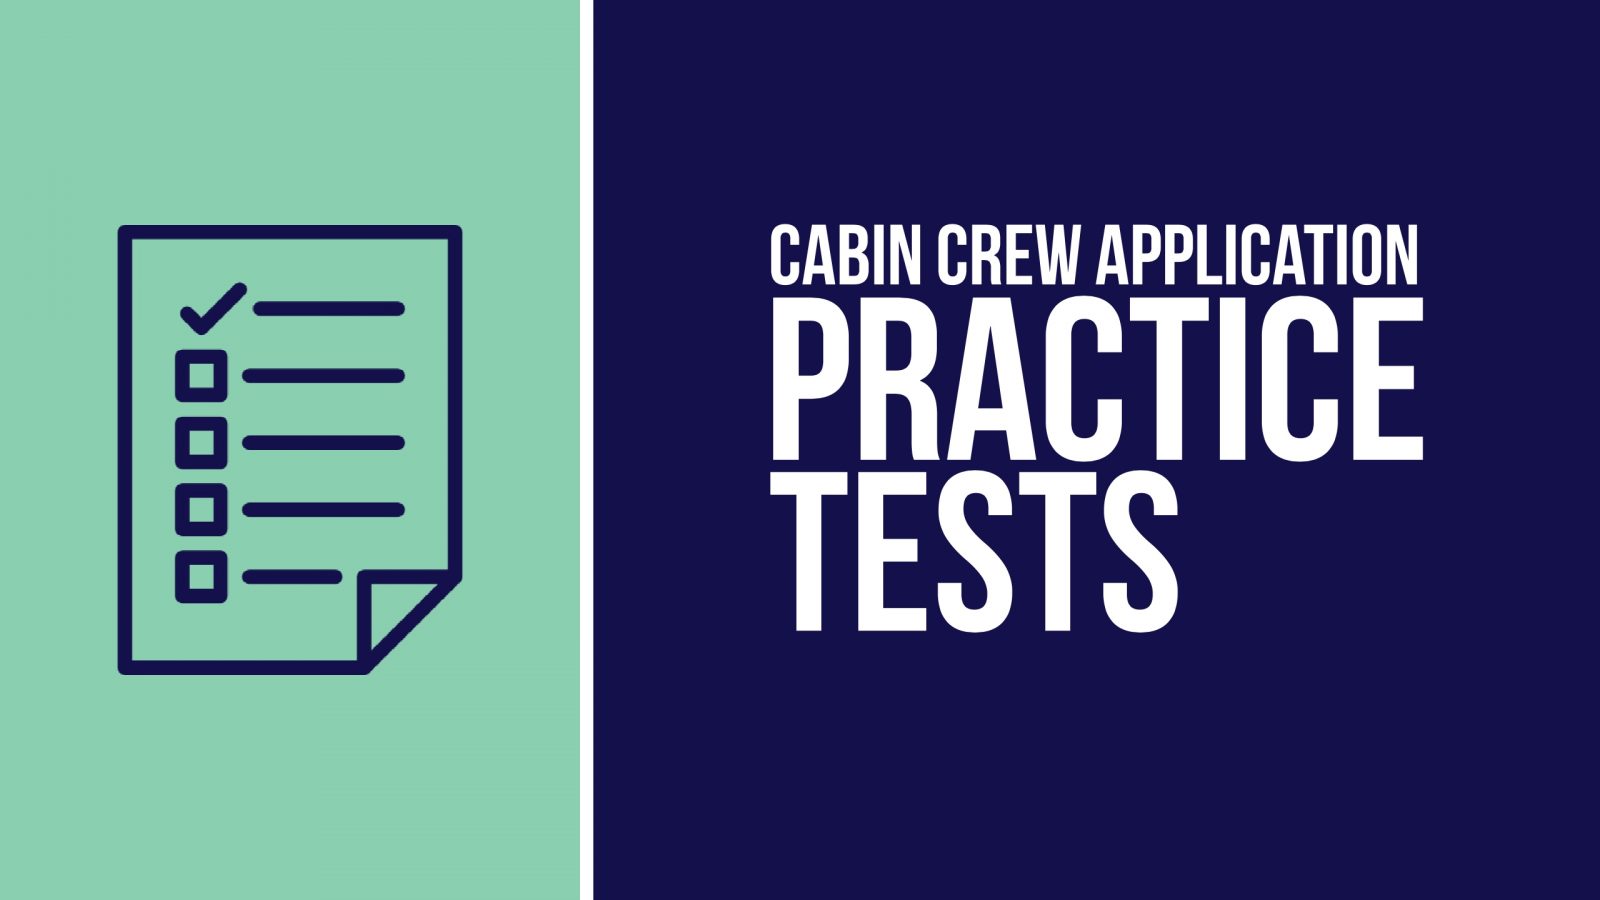 Practice Tests for the Most Popular Cabin Crew Entrance Exams Used by International Airlines